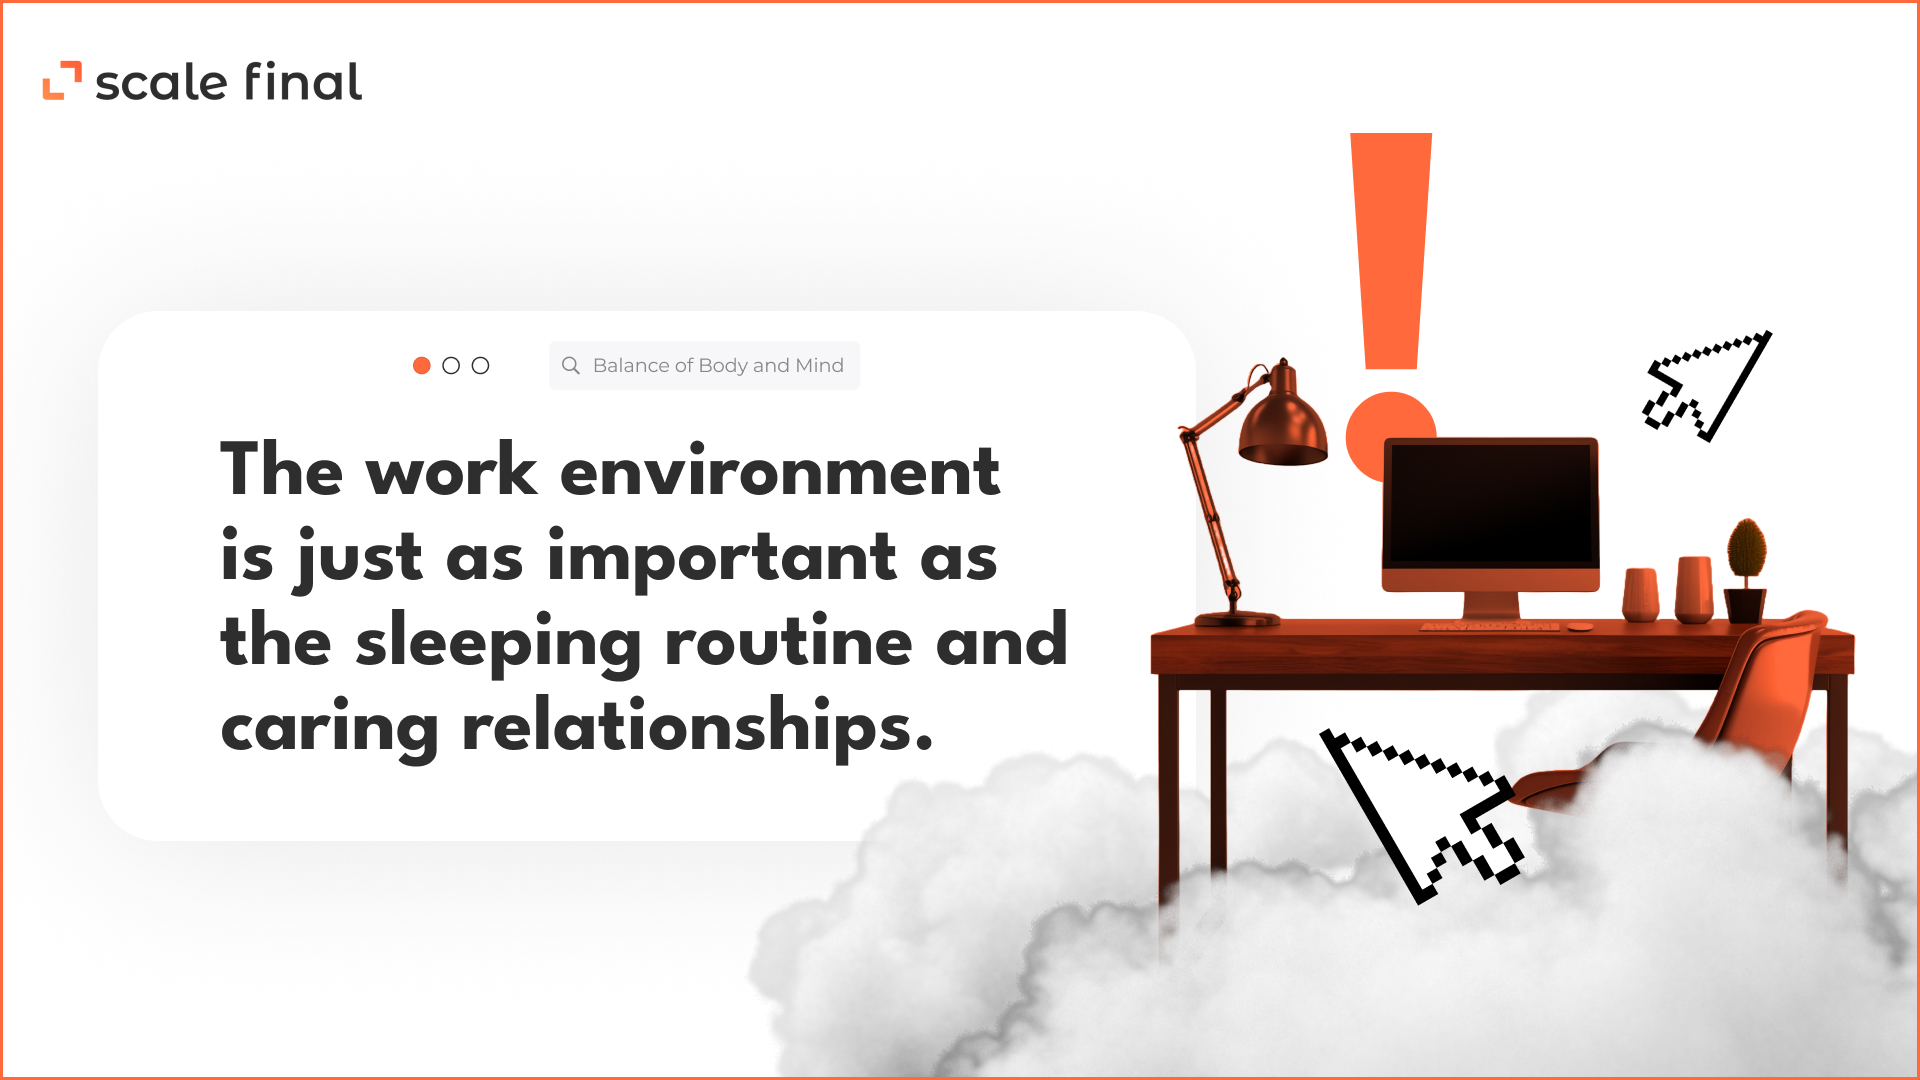 The work environment is just as important as the sleeping routine and caring relationships.